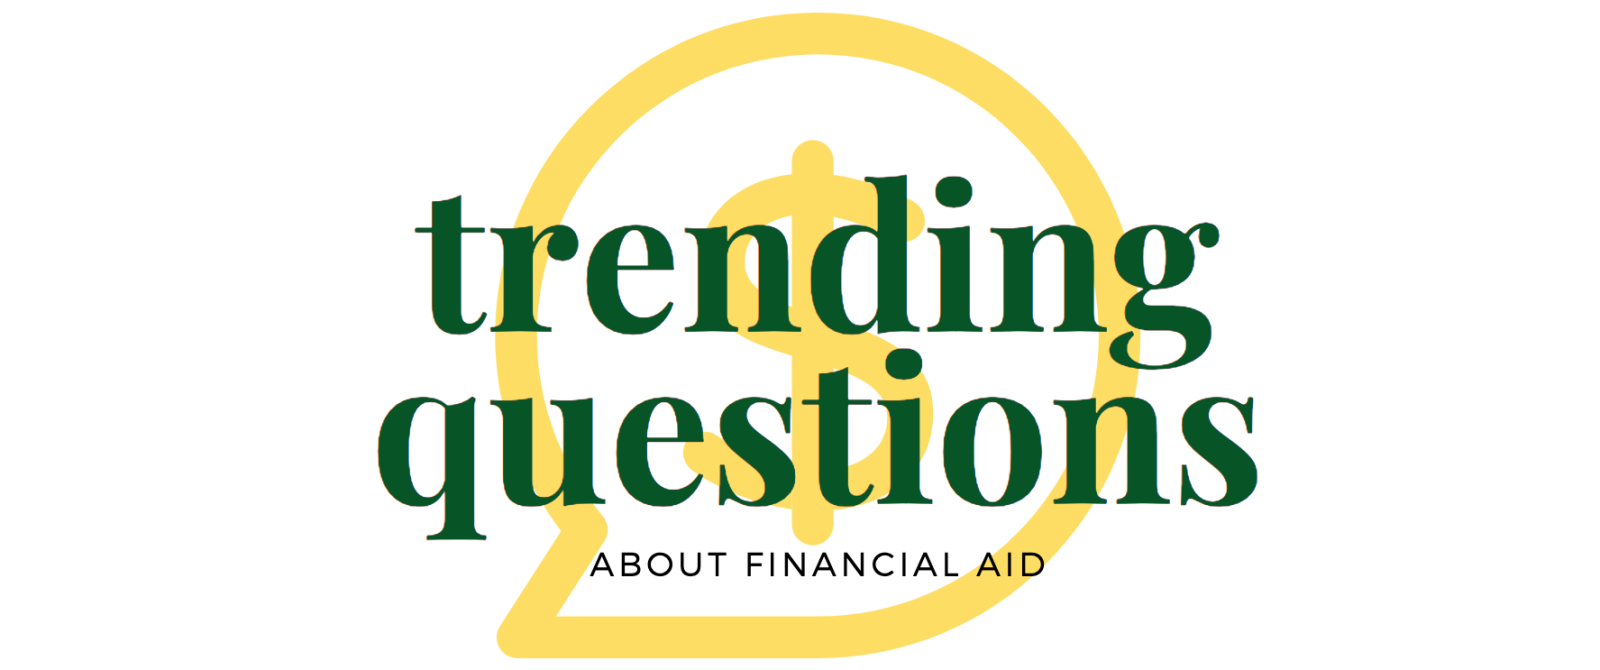 Trending Questions About Financial Aid